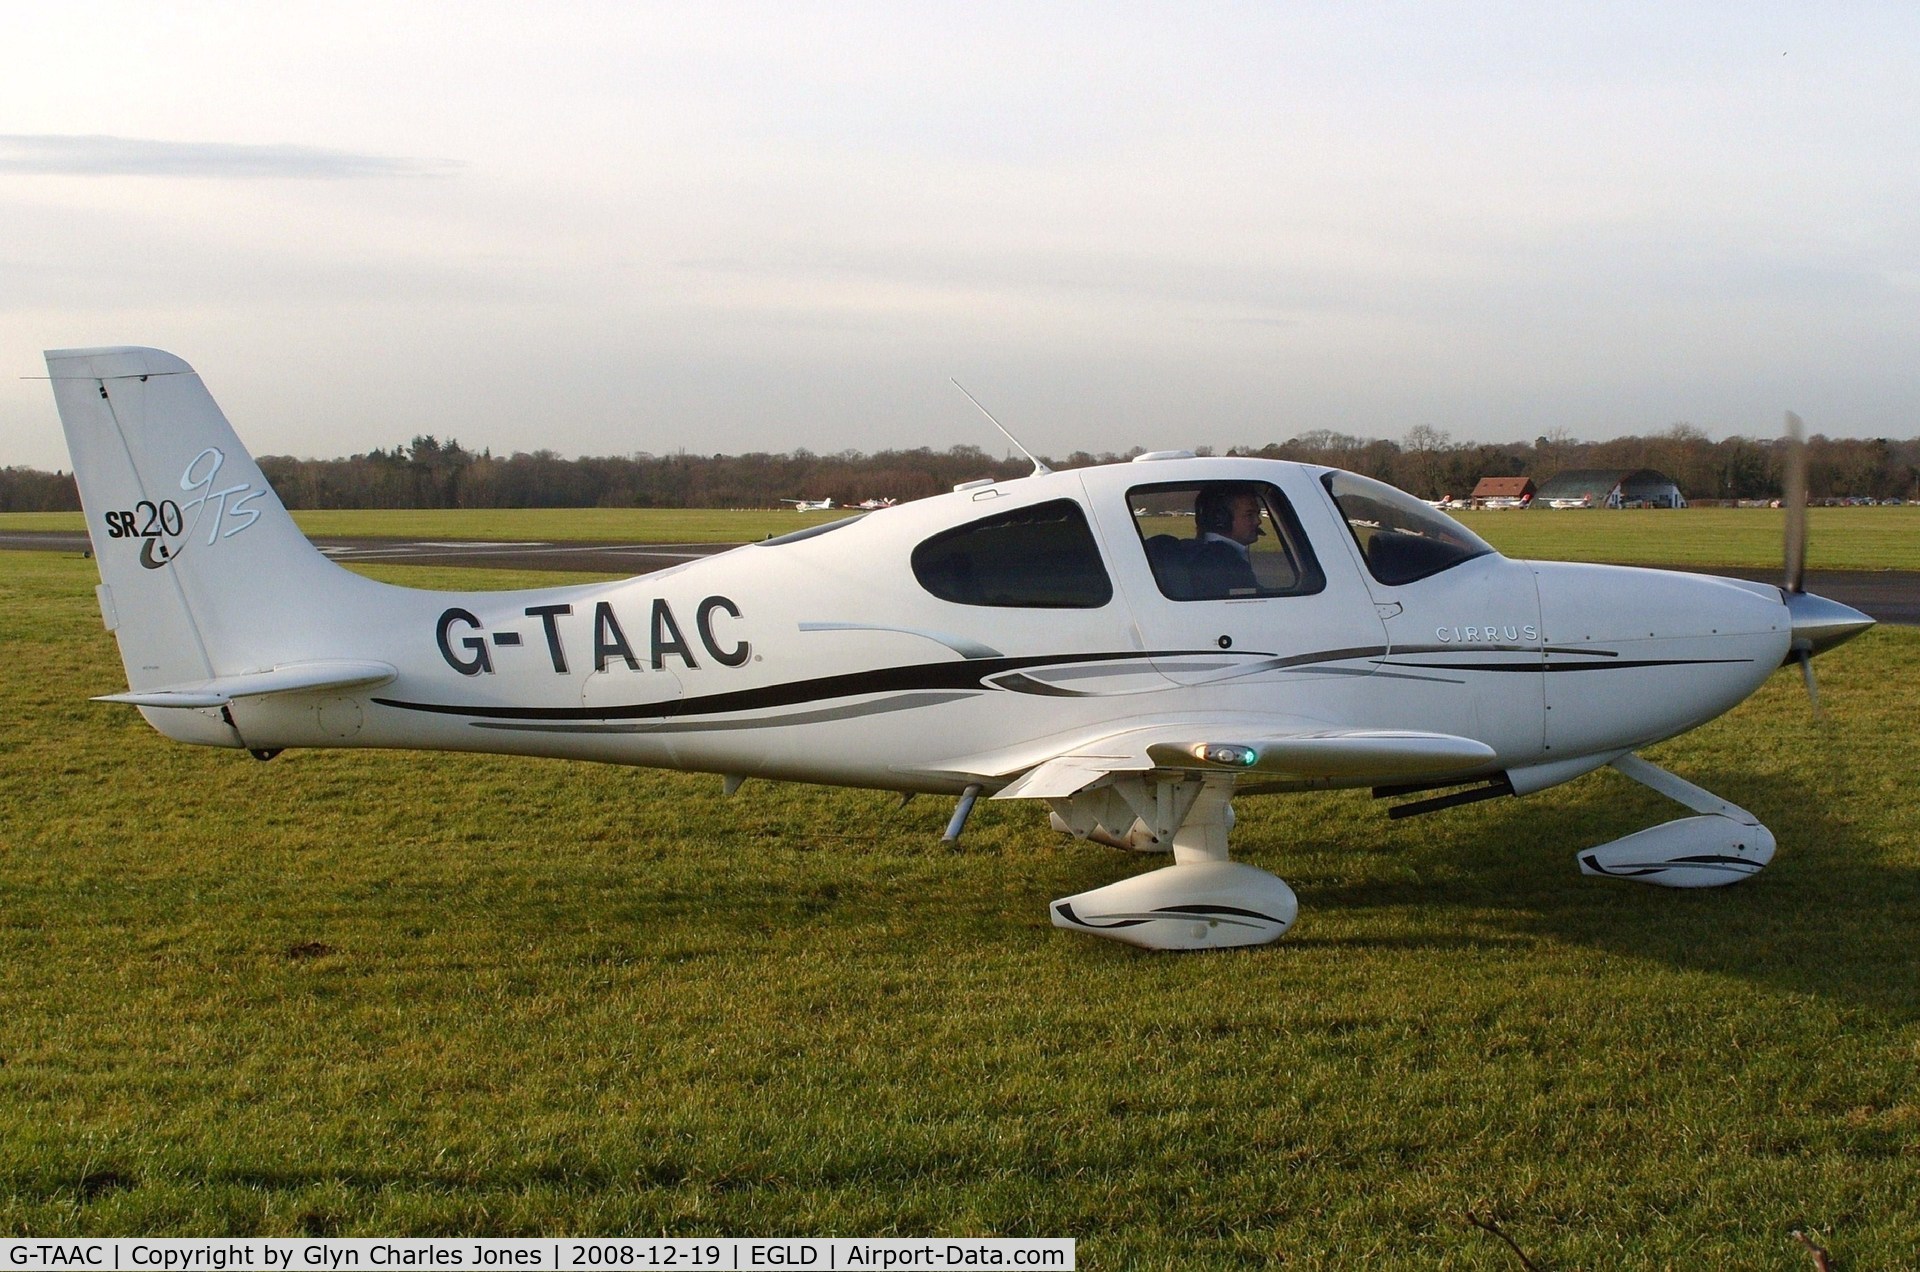 G-TAAC, 2006 Cirrus SR20 GTS C/N 1694, Awaiting clearance to line up and take off on runway 24. Previously N997SR. In memory of pilot Michael Stephen Owen who was killed aged 29 in Cessna F150G G-AVPG at Denham exactly 40 years ago on December 19, 1968. Owned by TAA UK Ltd.